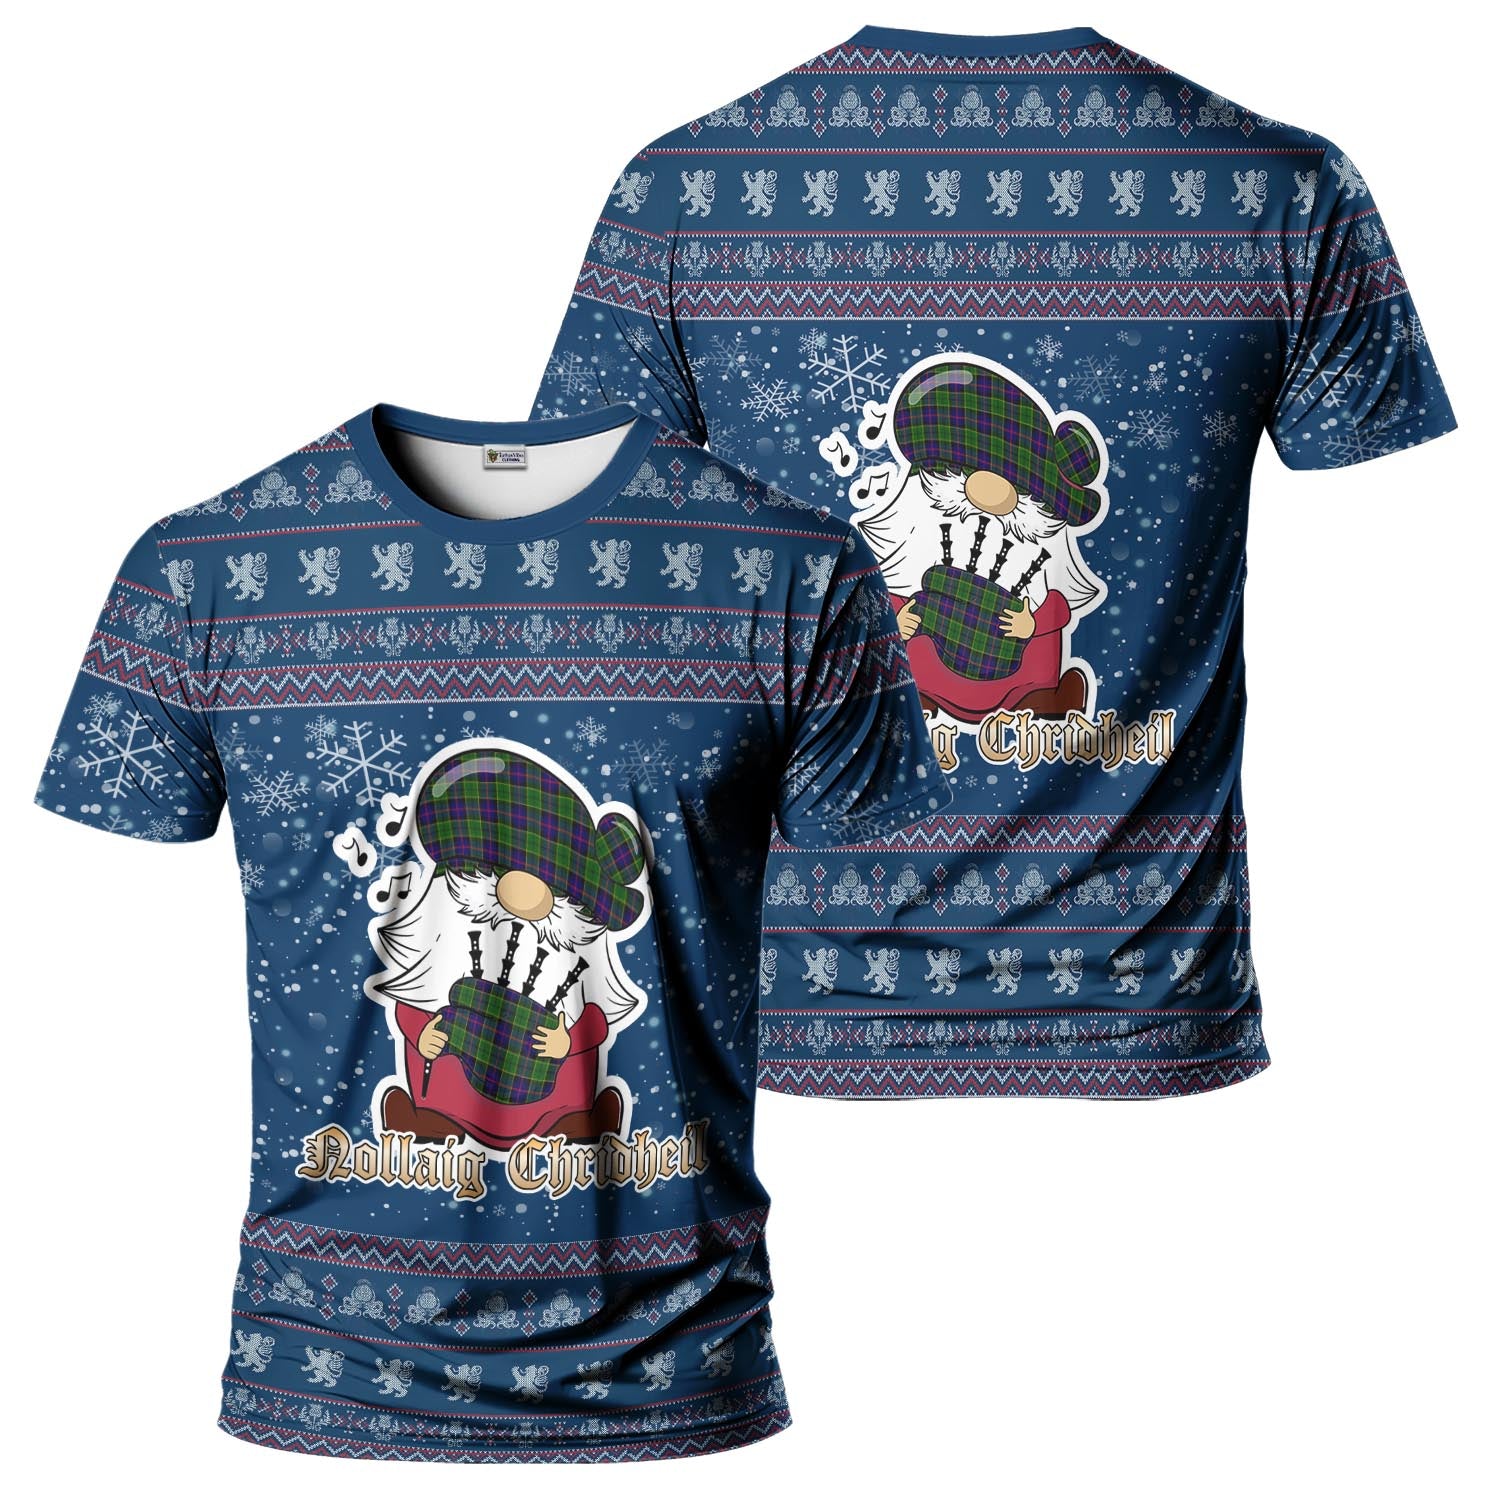 Forsyth Modern Clan Christmas Family T-Shirt with Funny Gnome Playing Bagpipes Kid's Shirt Blue - Tartanvibesclothing